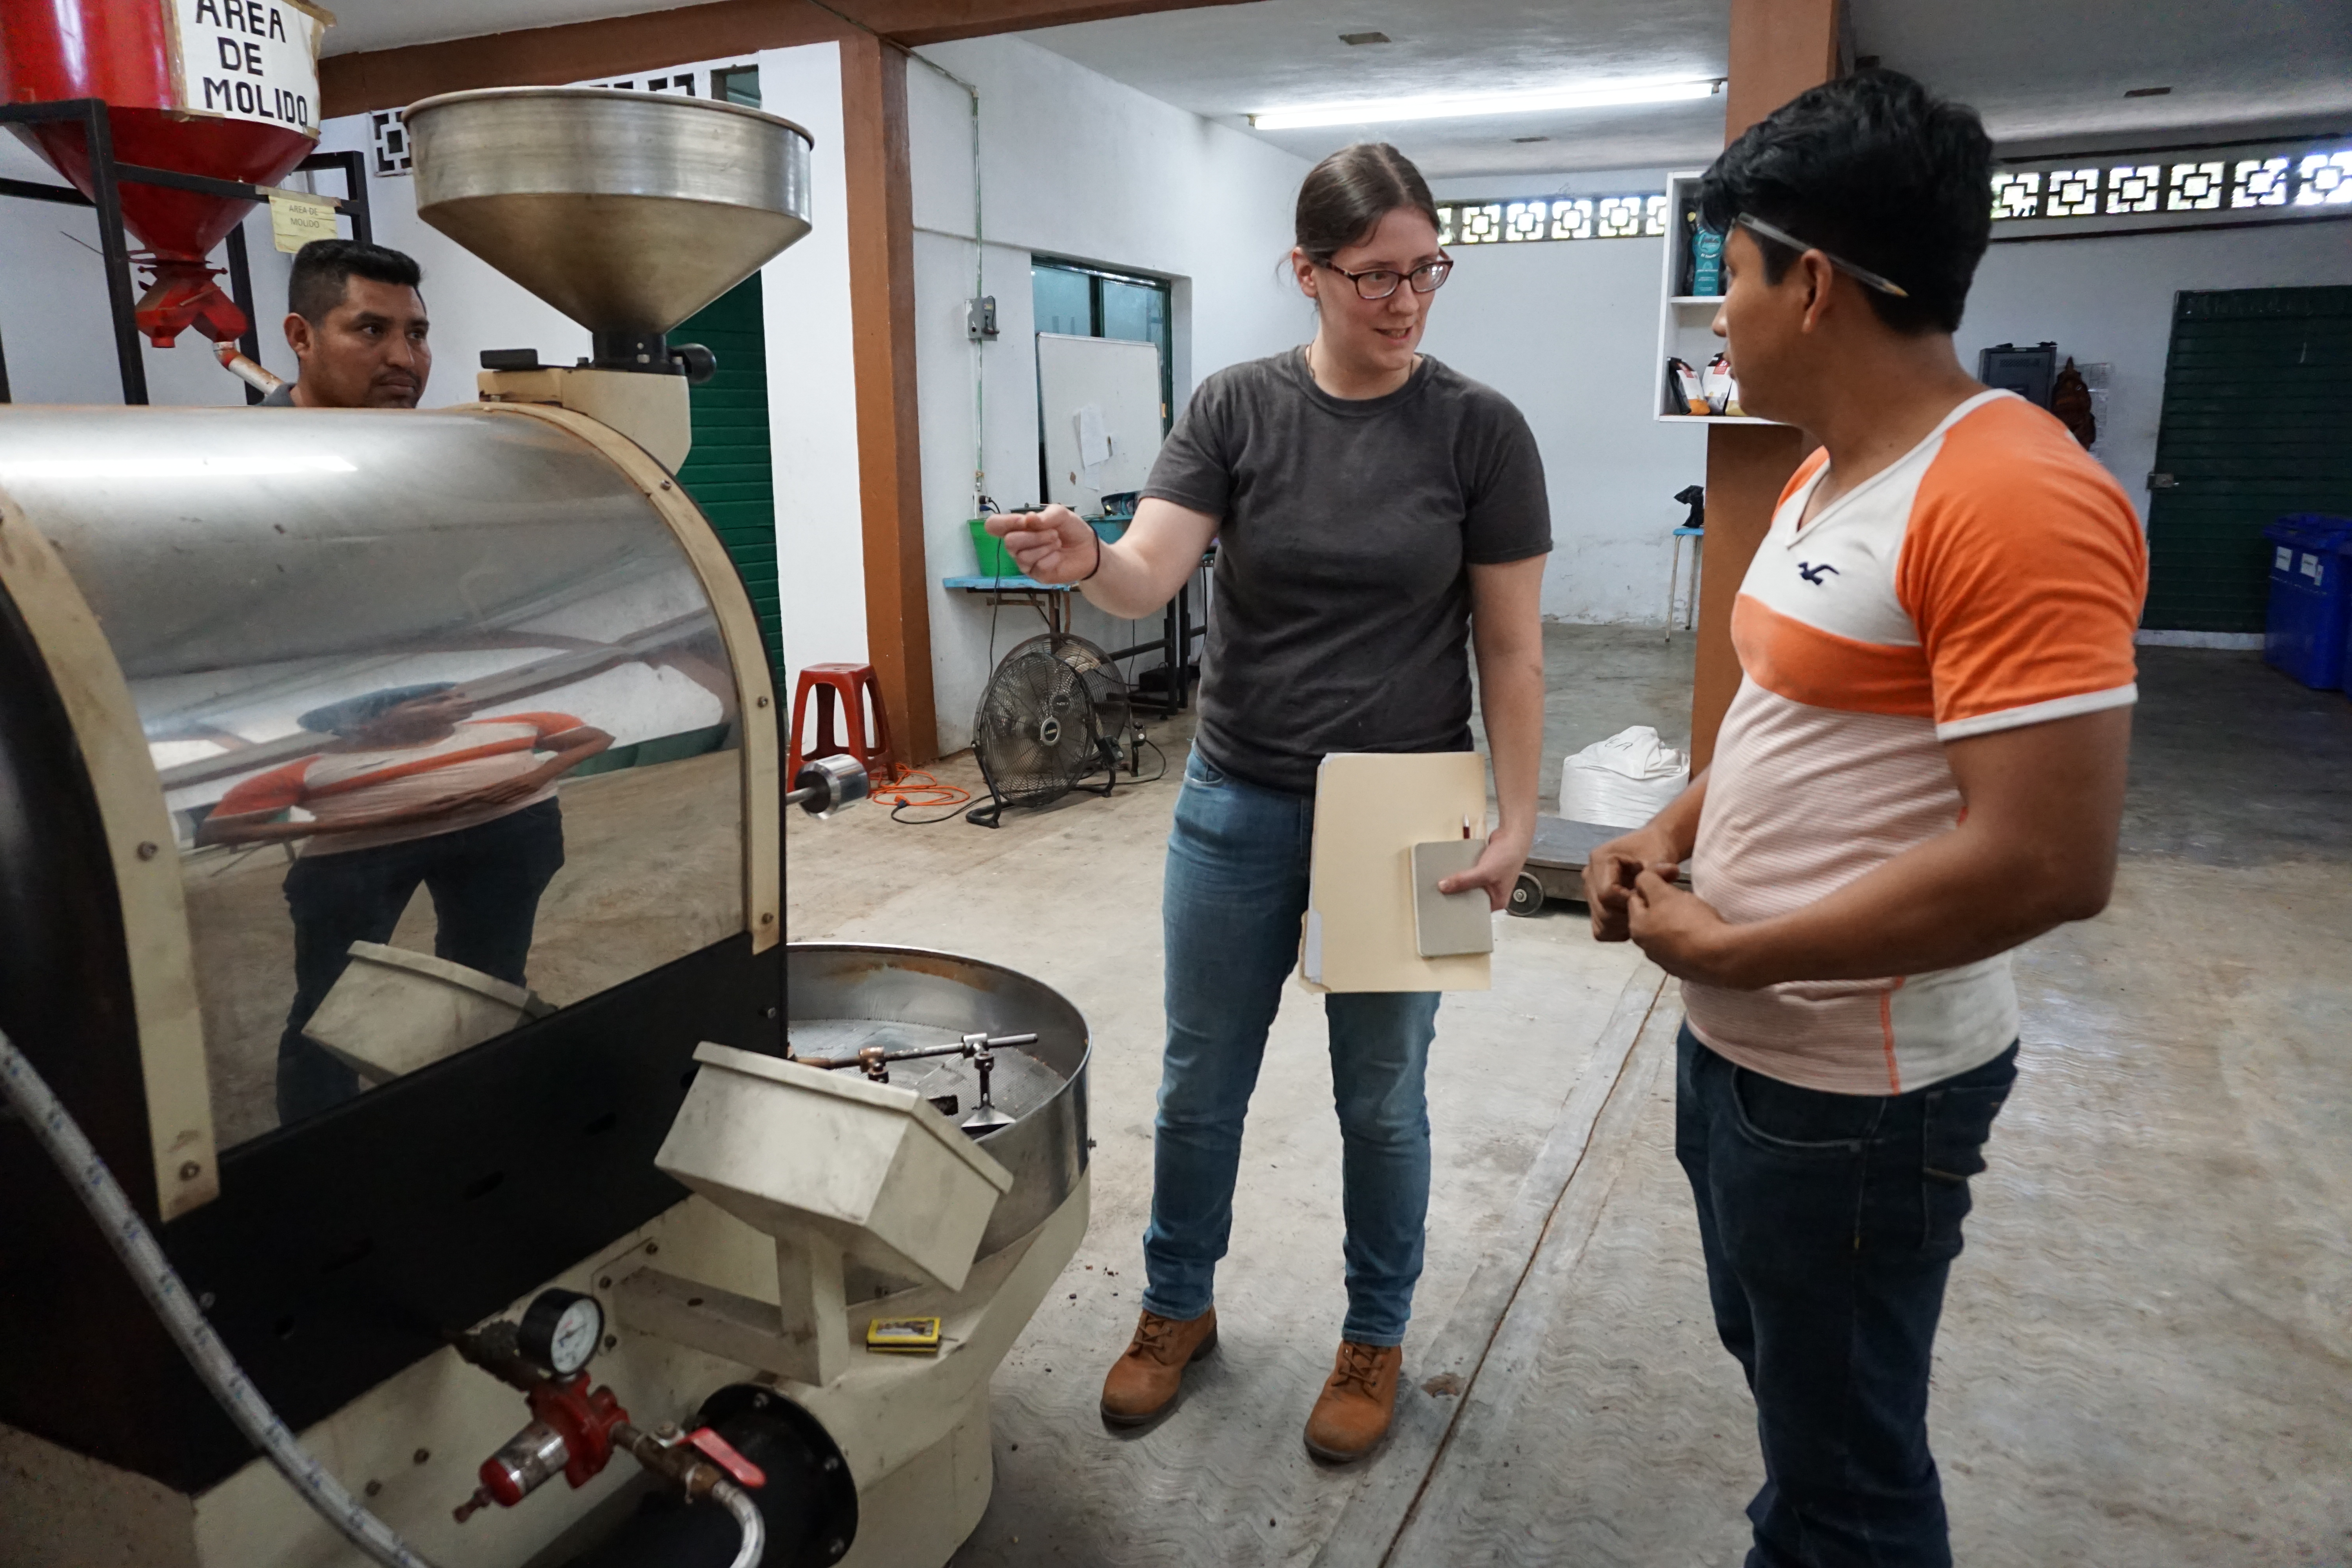 EE lead roaster Sarah Hrisak running a training with members of the roasting team at CESMACH